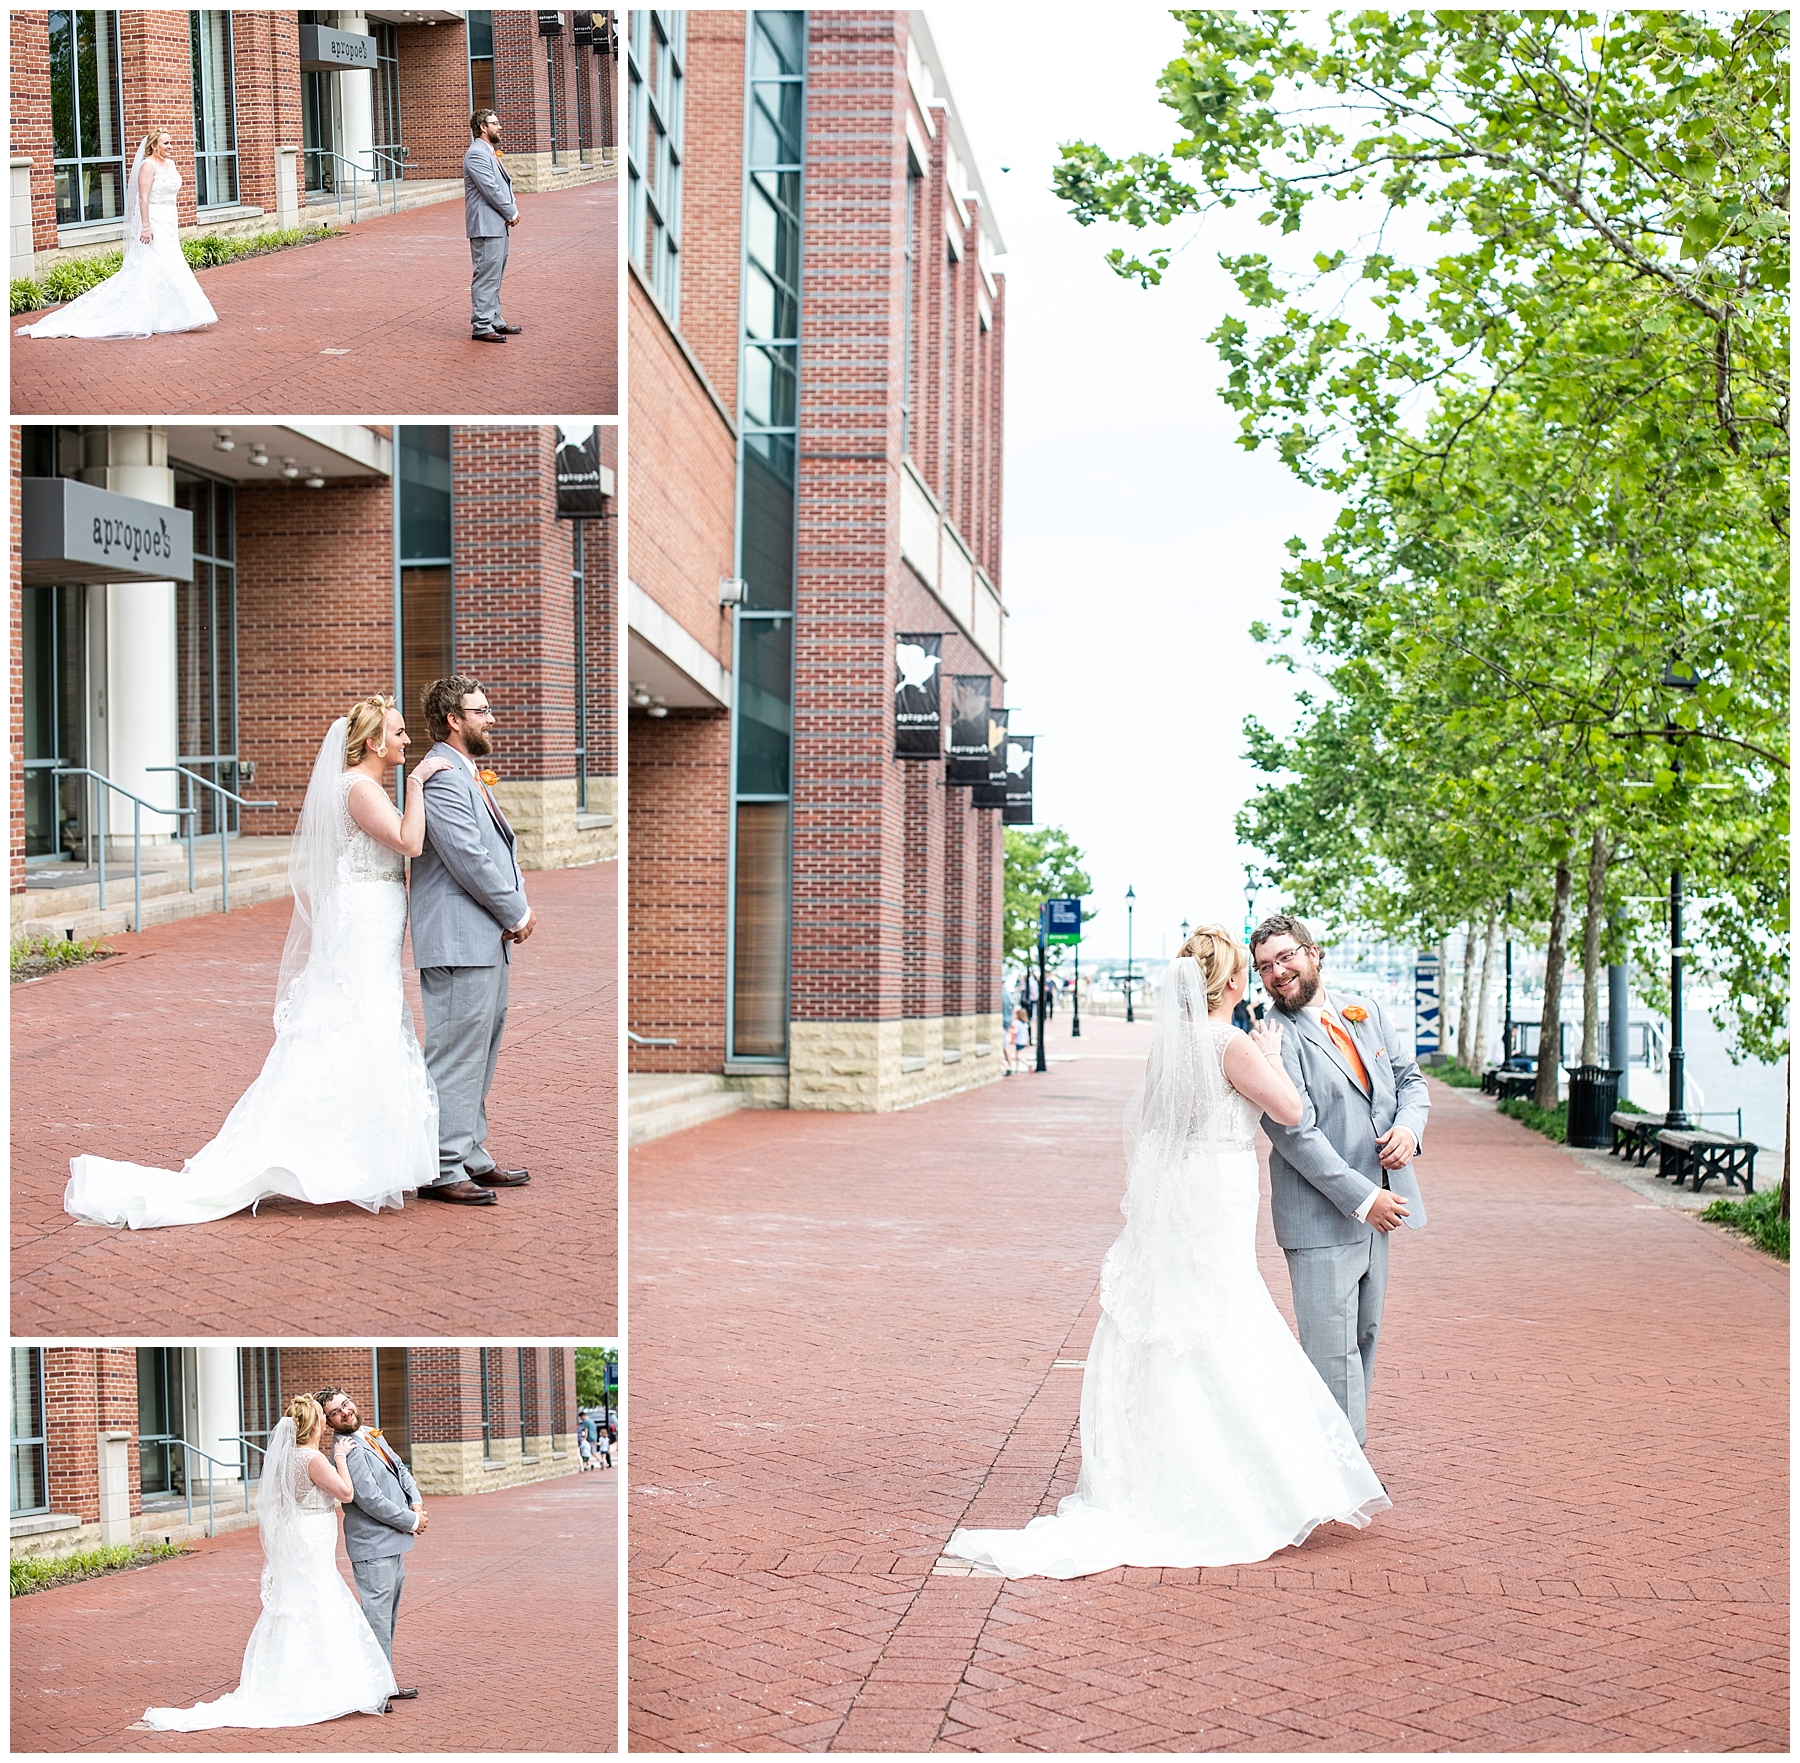 Tess Ray Baltimore Museum of Industry Rainy Day Wedding Living Radiant Photography photos_0034.jpg